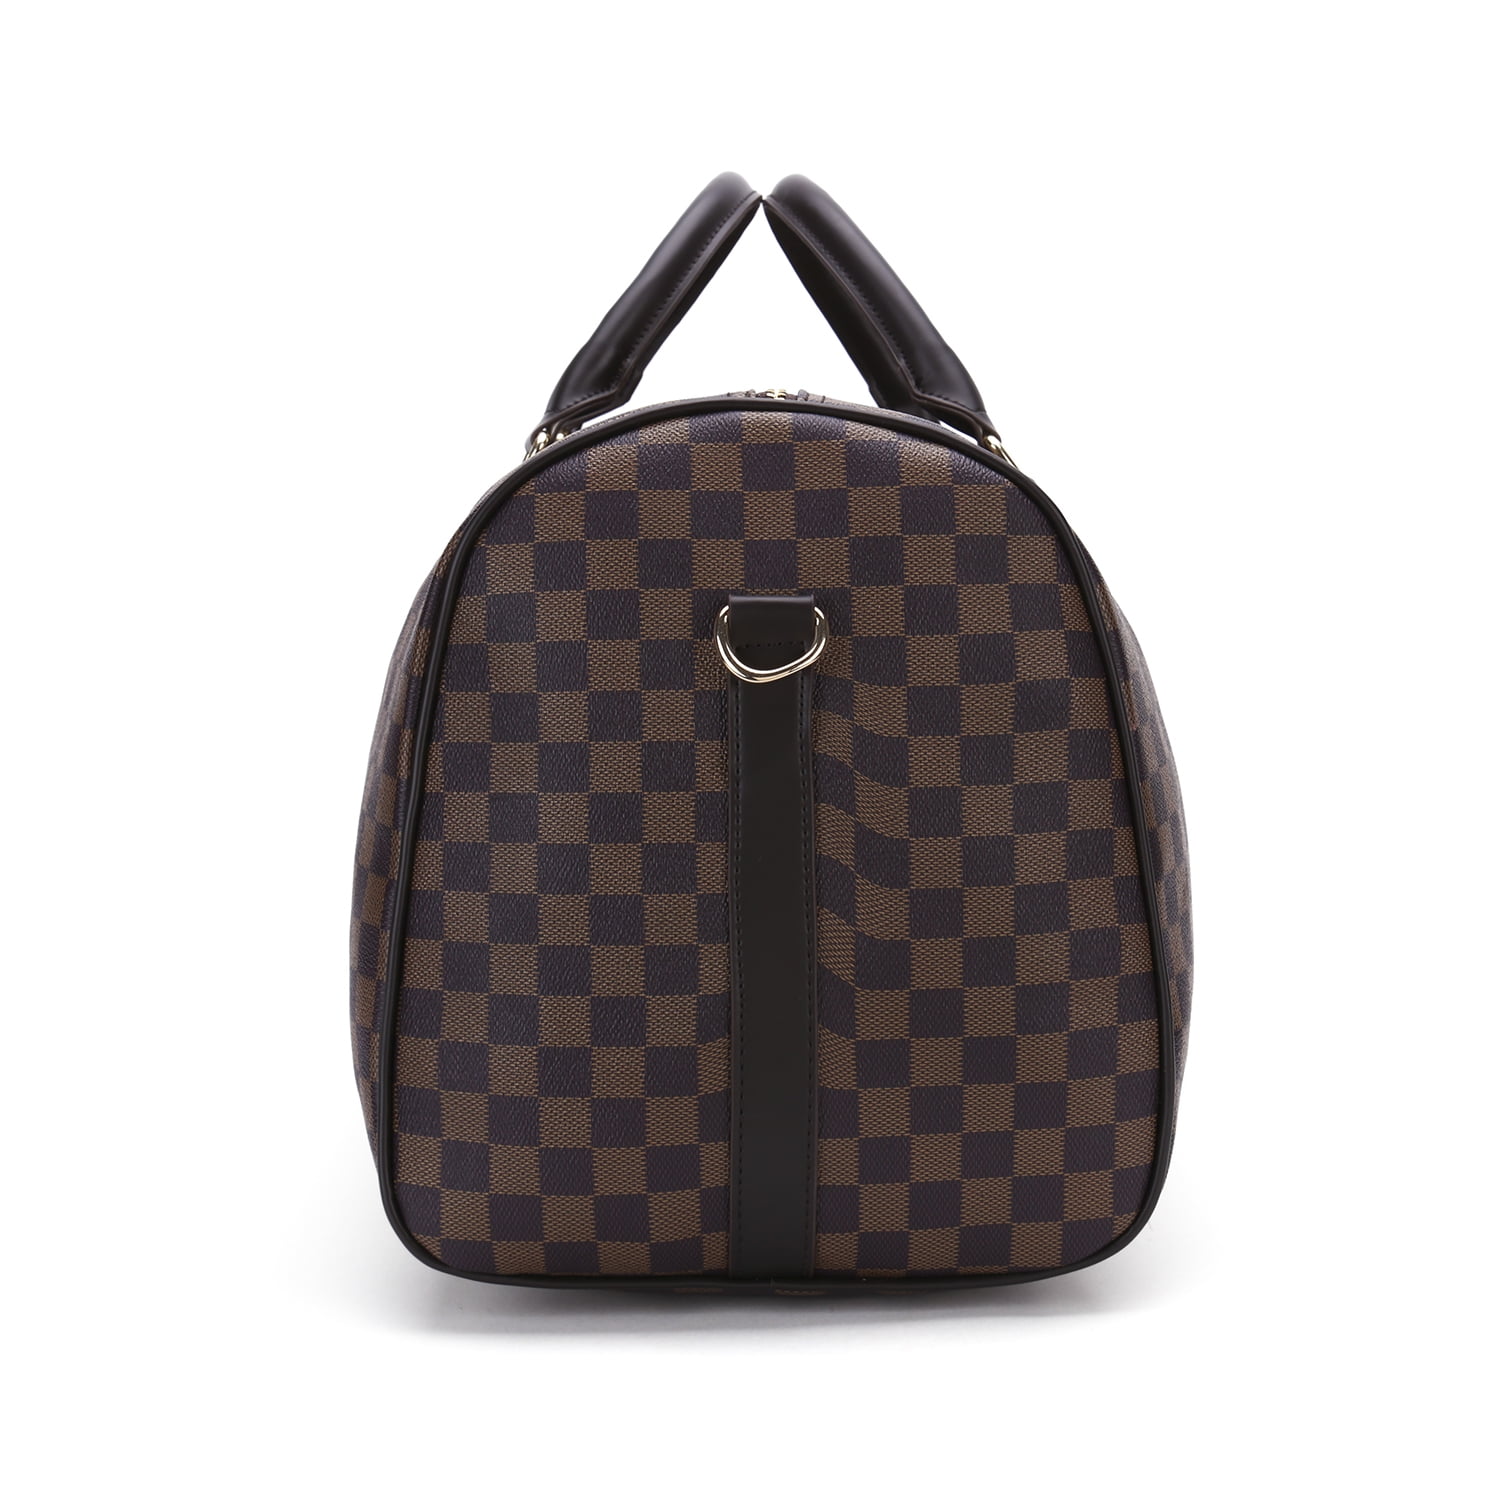 Boujee Weekend Away Grey And White Checkered Duffle Bag DOORBUSTER